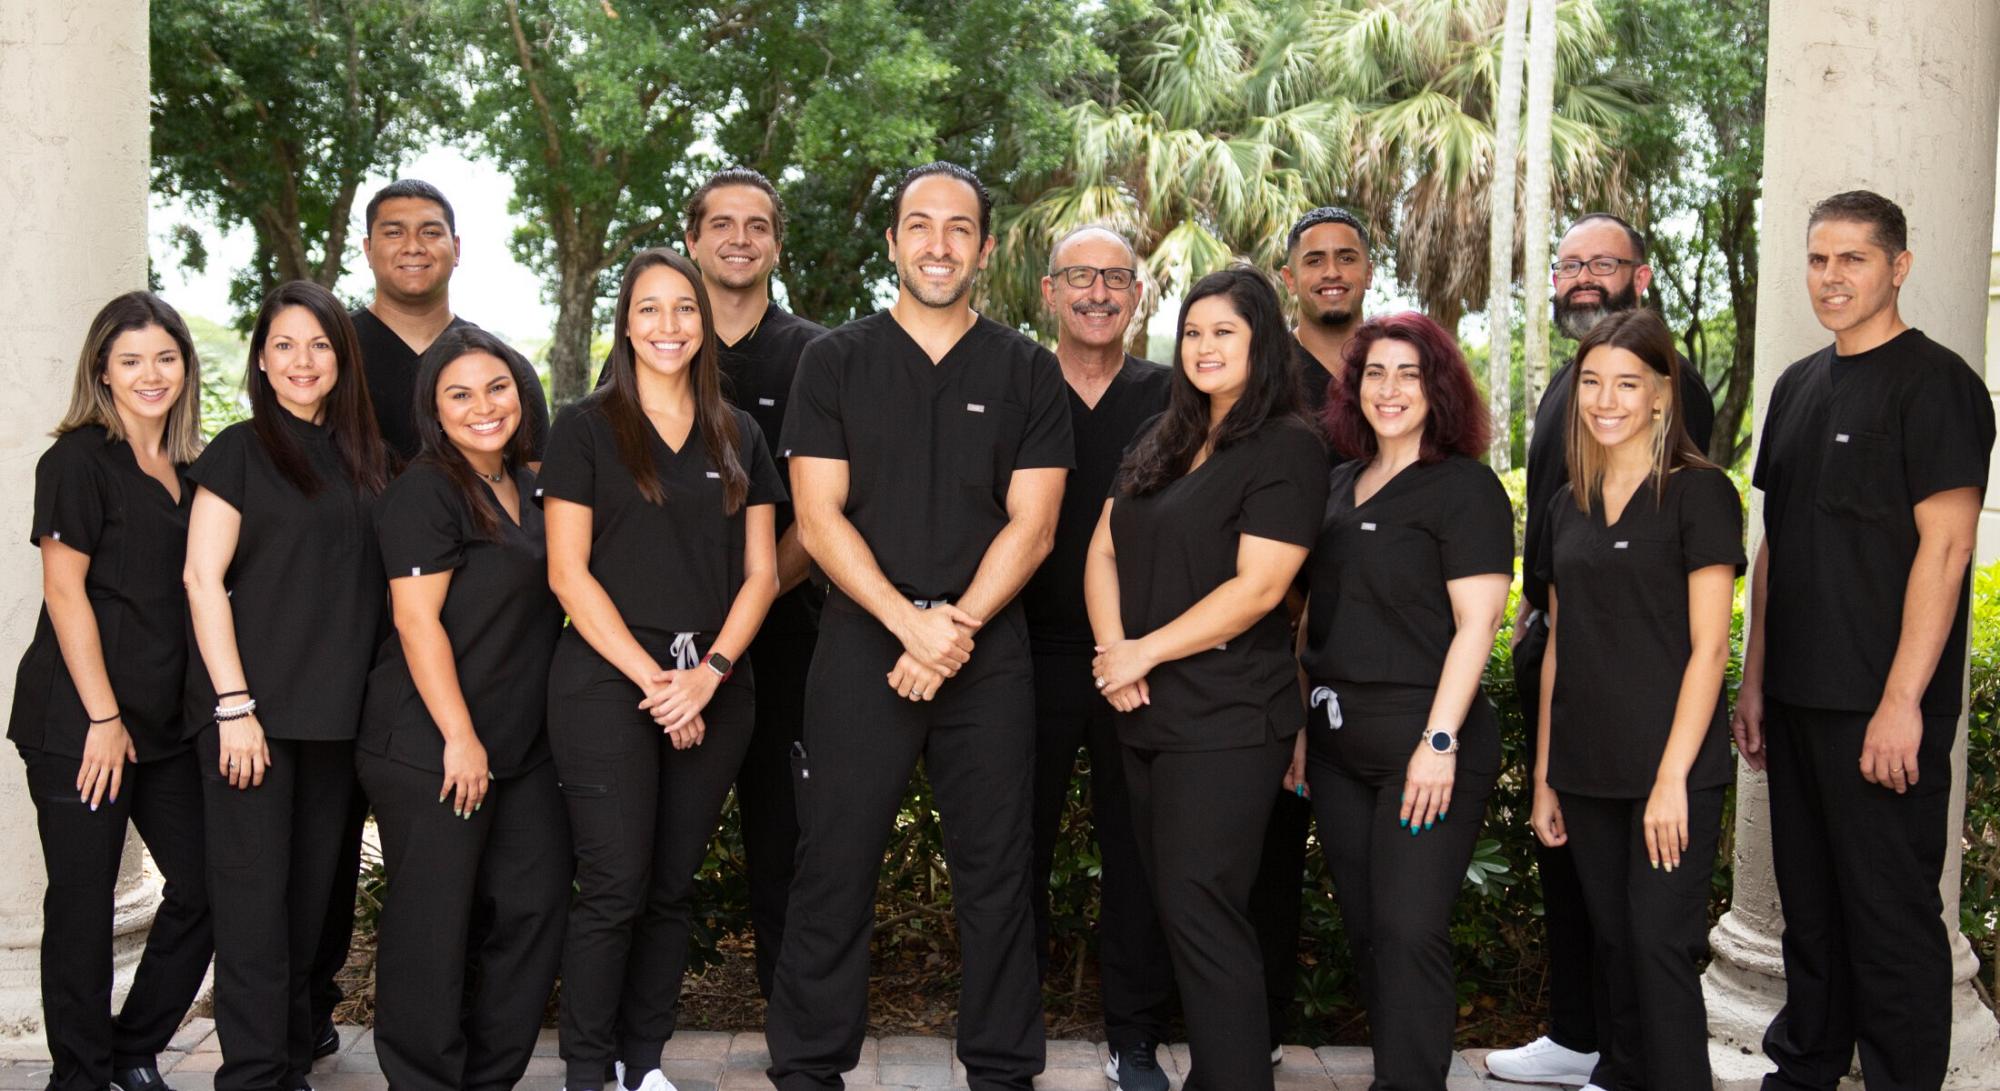 Broward ENT Specialists group shot